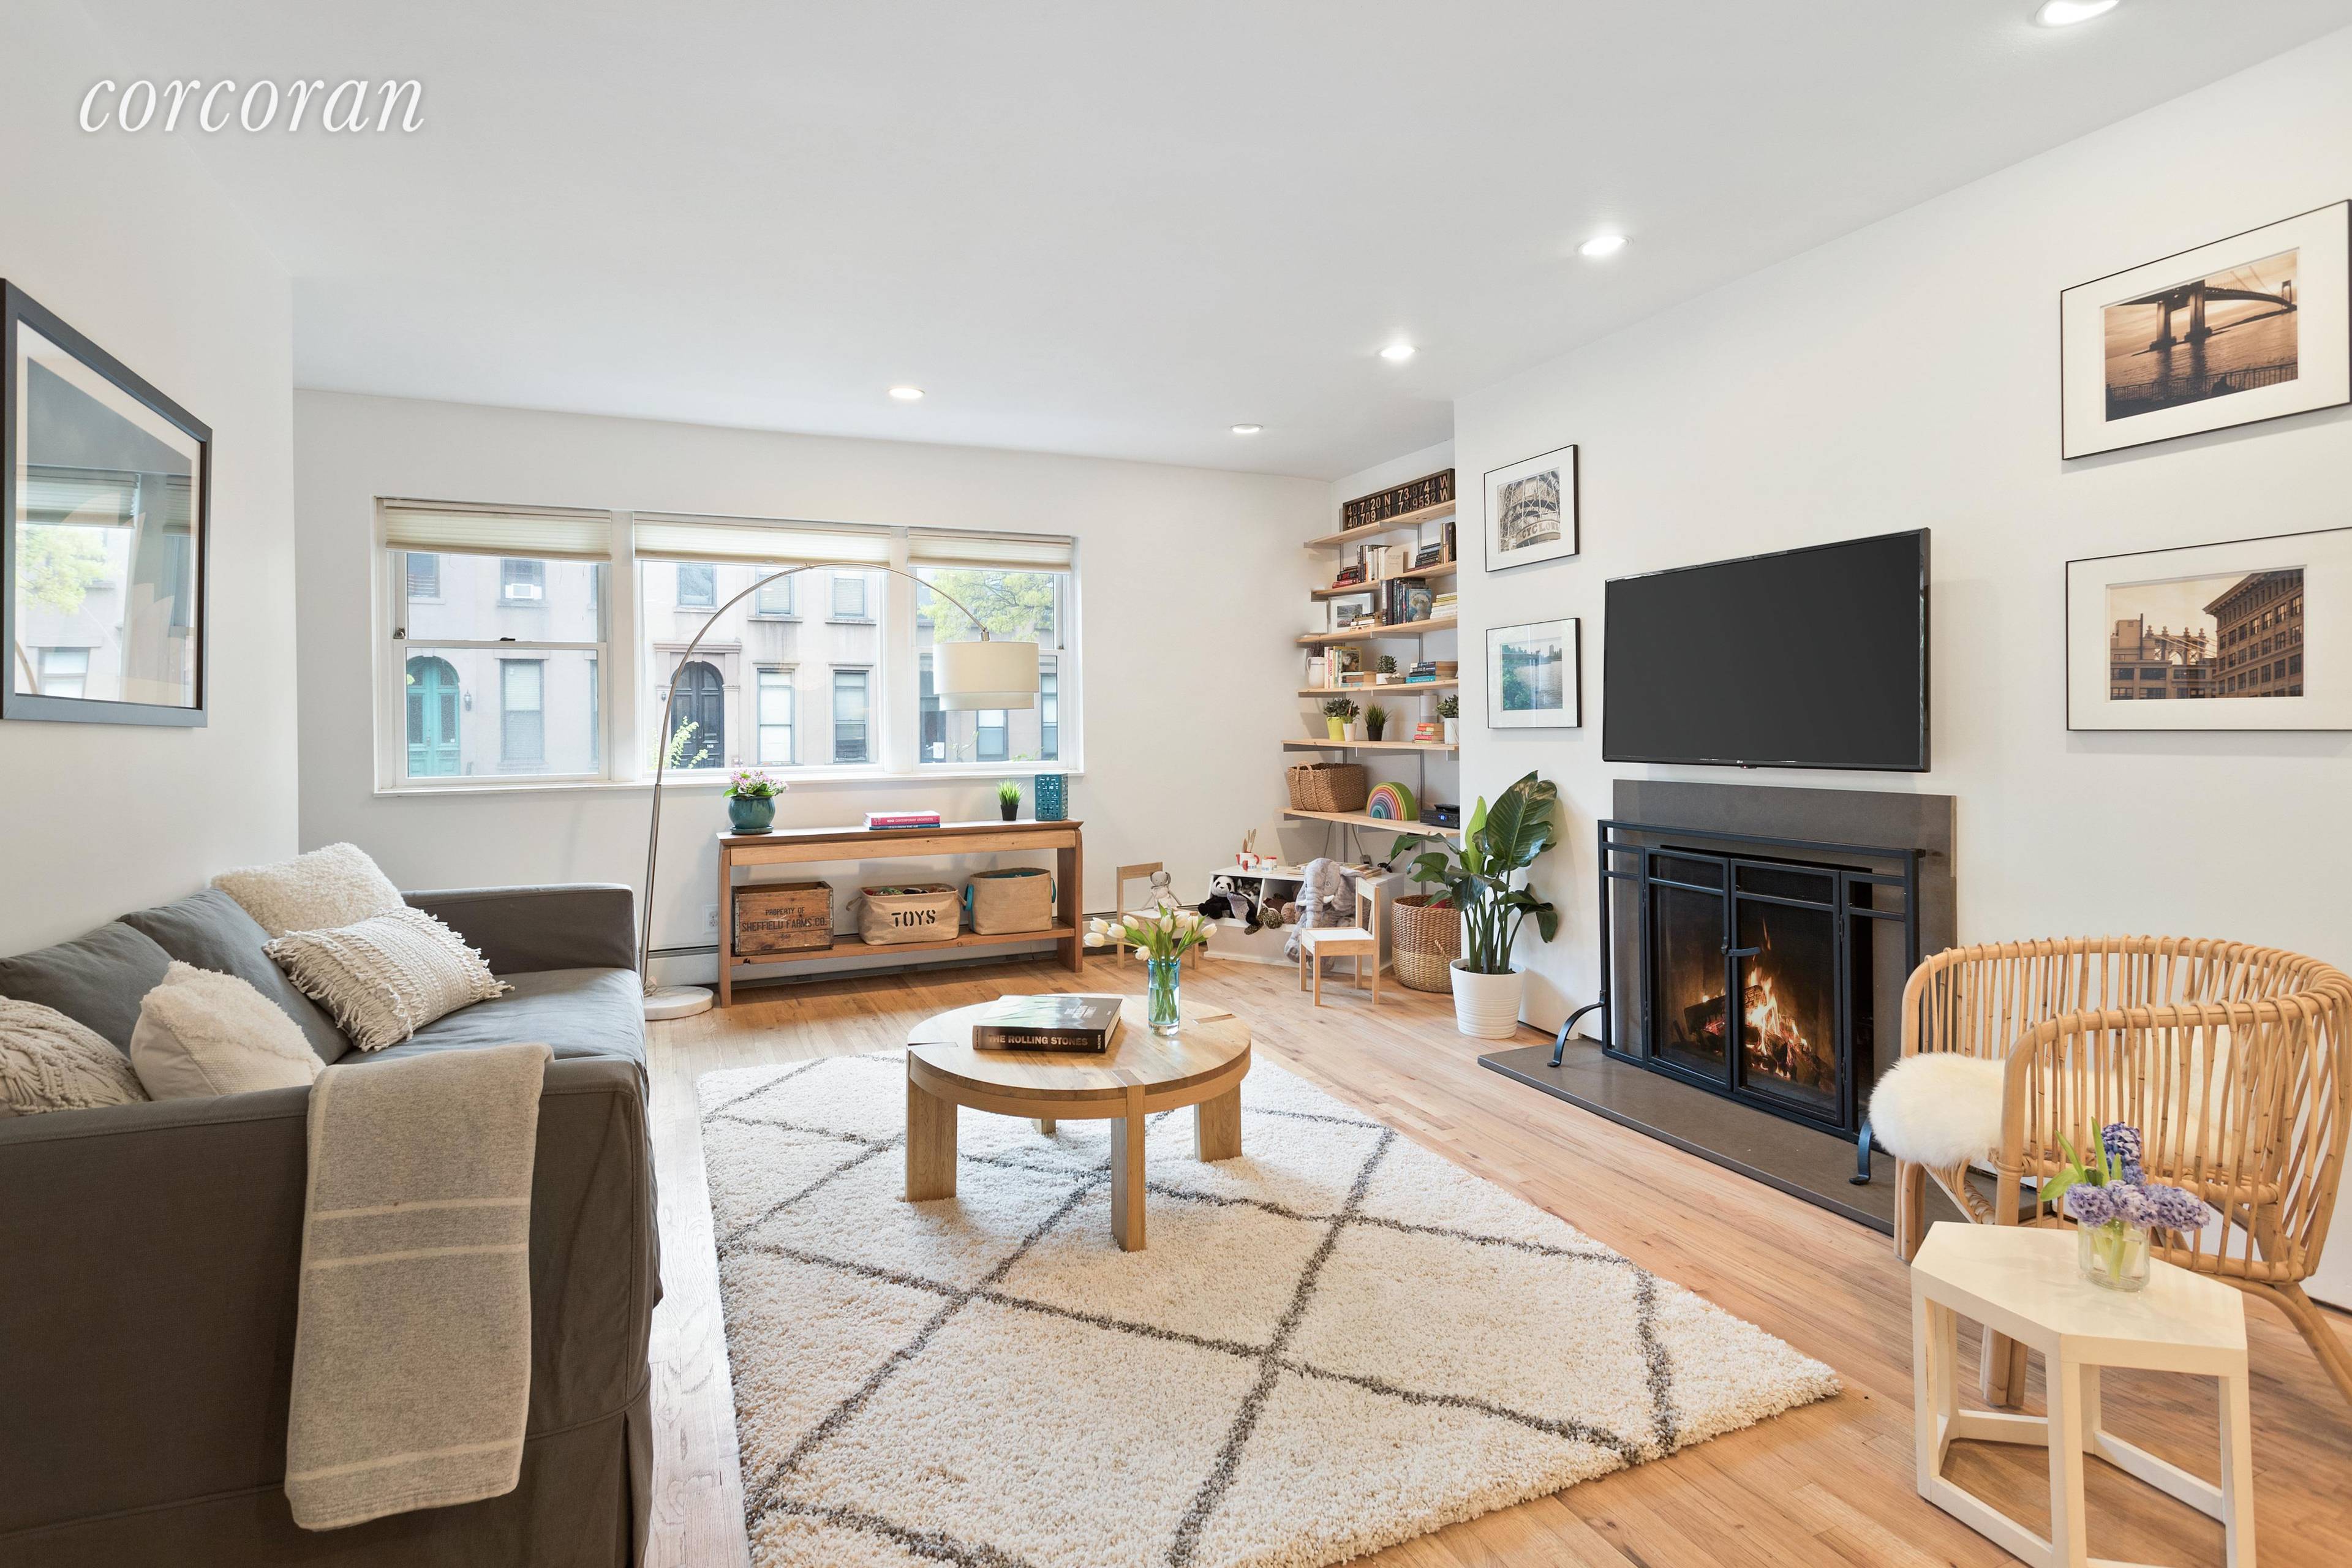 Come discover 167 Carroll Street, a quintessential Carroll Gardens Coop with unbeatable location between charming tree lined Henry and Clinton Streets.